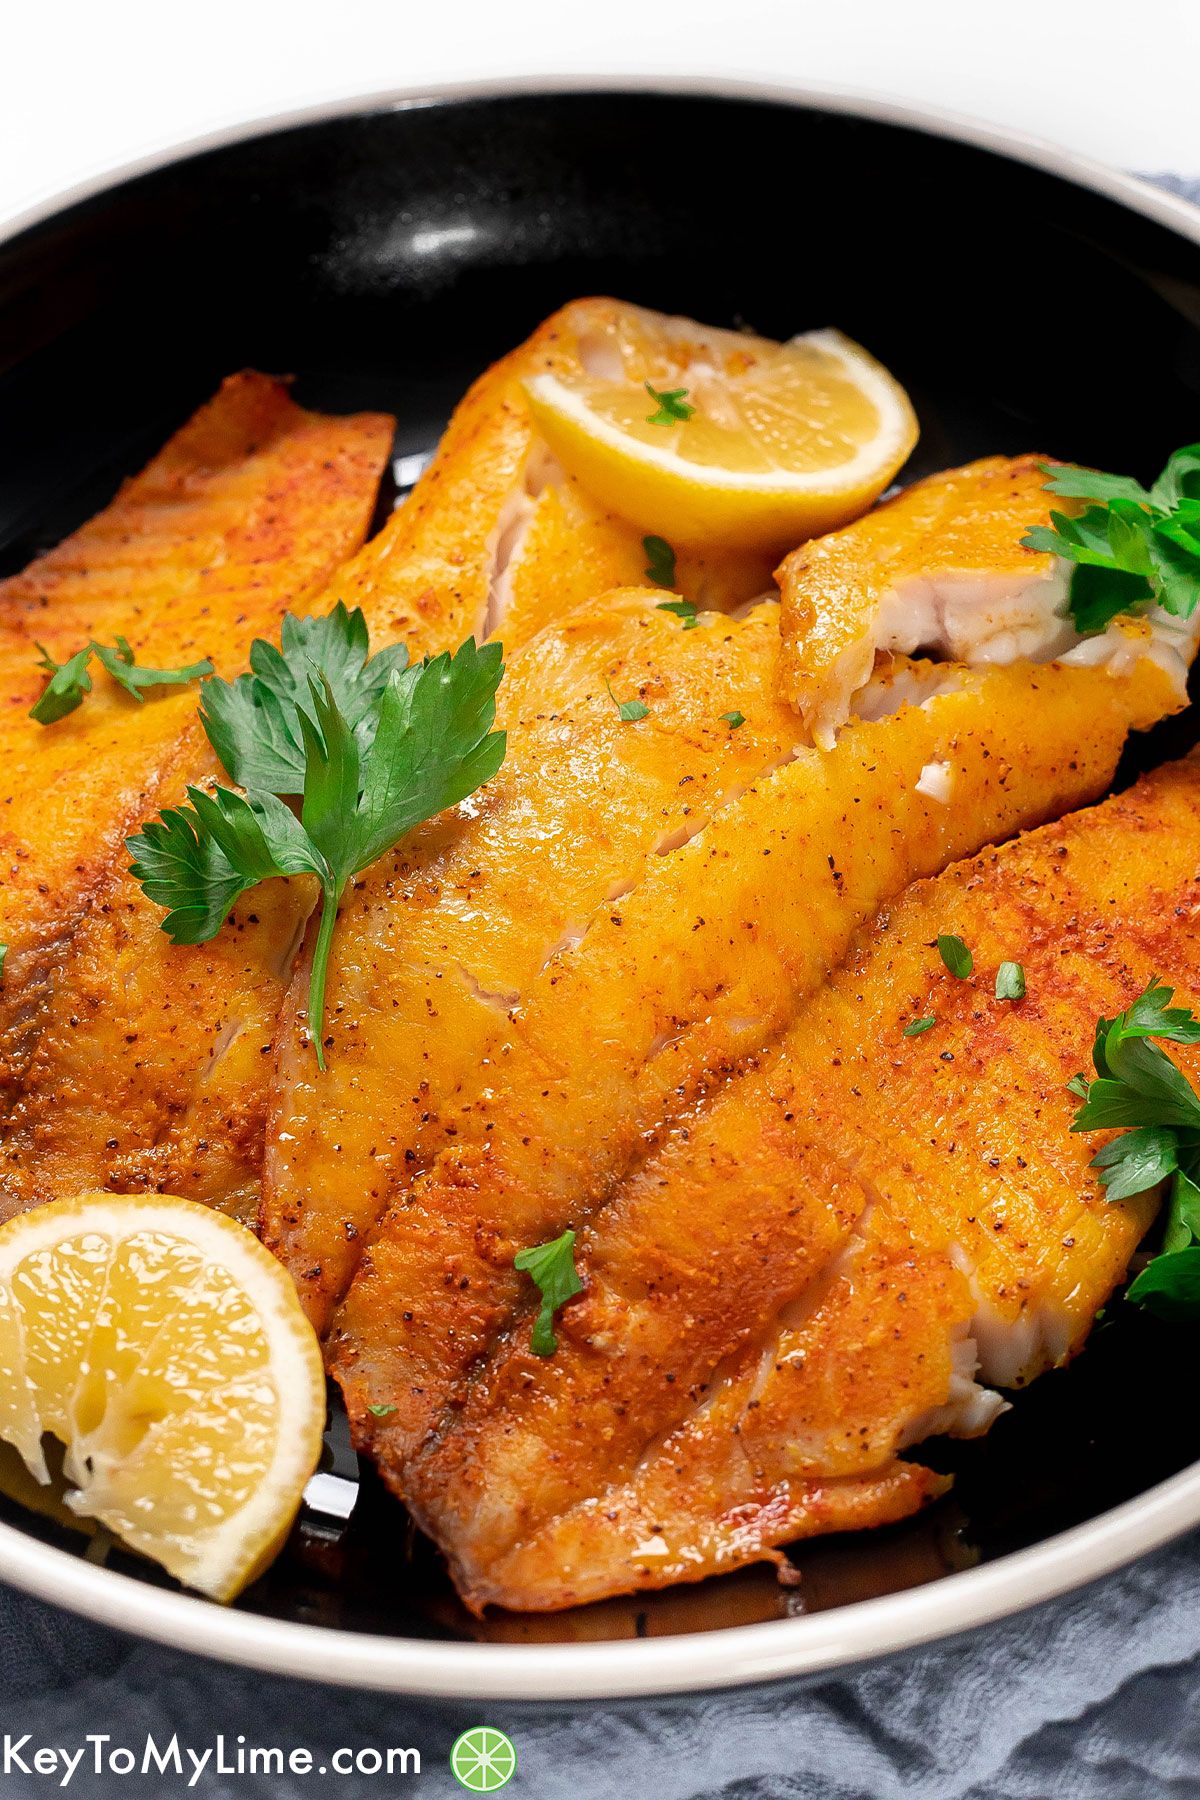 A garnished plate of cooked fish with lemon wedges and parsley scattered throughout.